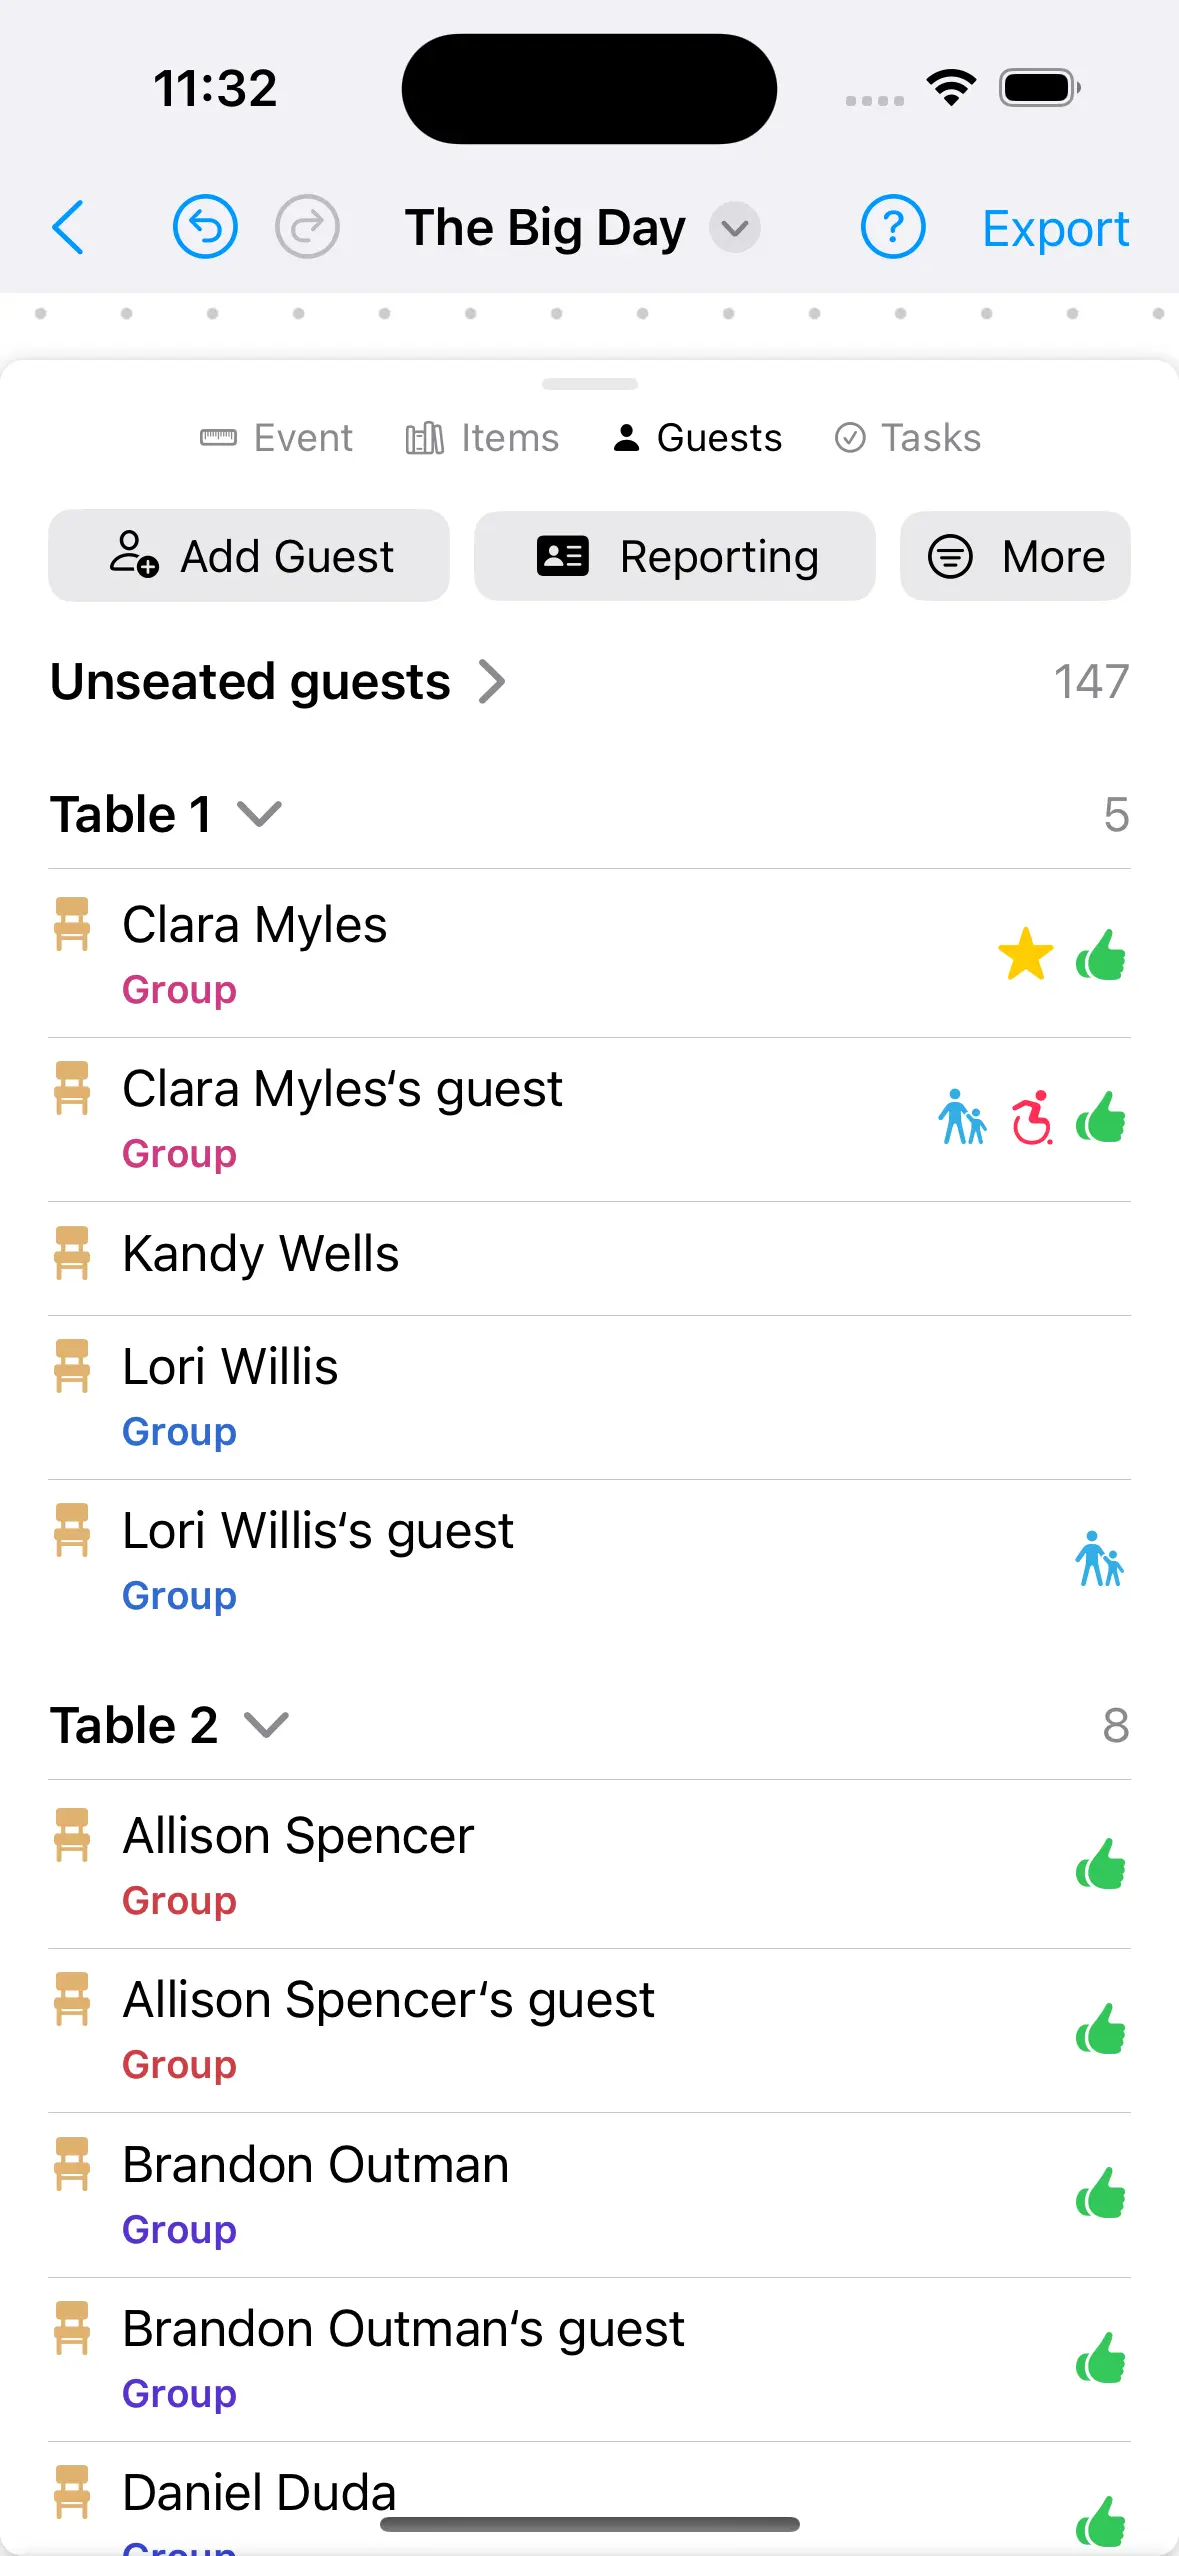 Your guest list shows a preview of all of your guests including what group they are a part of, if they are attending, and tags like VIP, child, and accessibility needs.